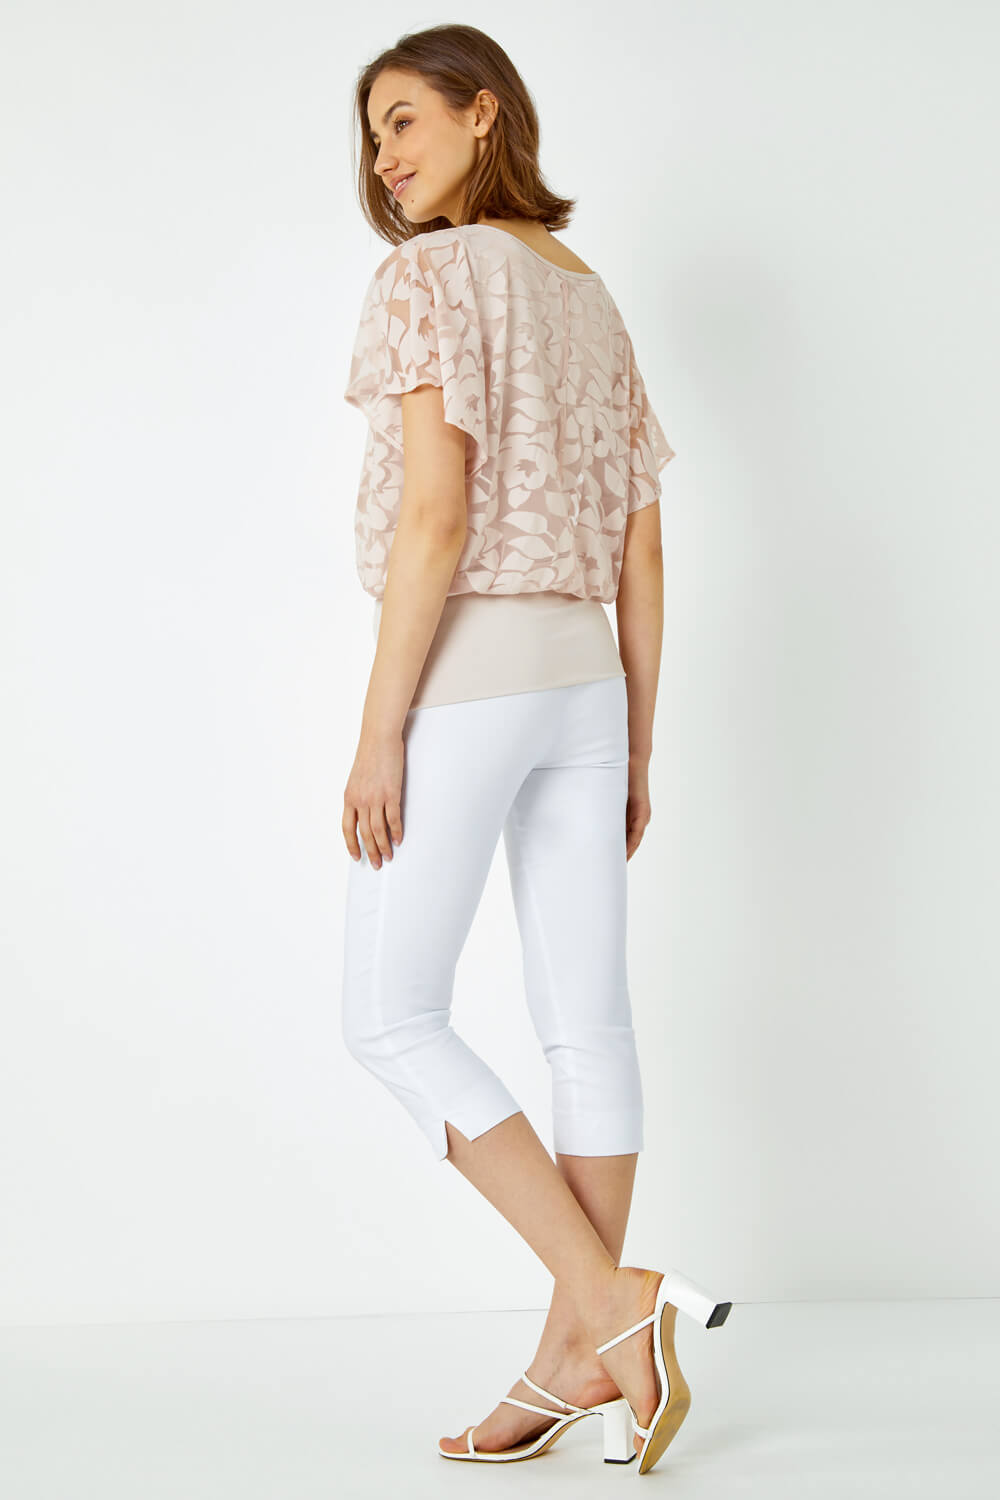 Stone Textured Floral Blouson Stretch Top, Image 3 of 5